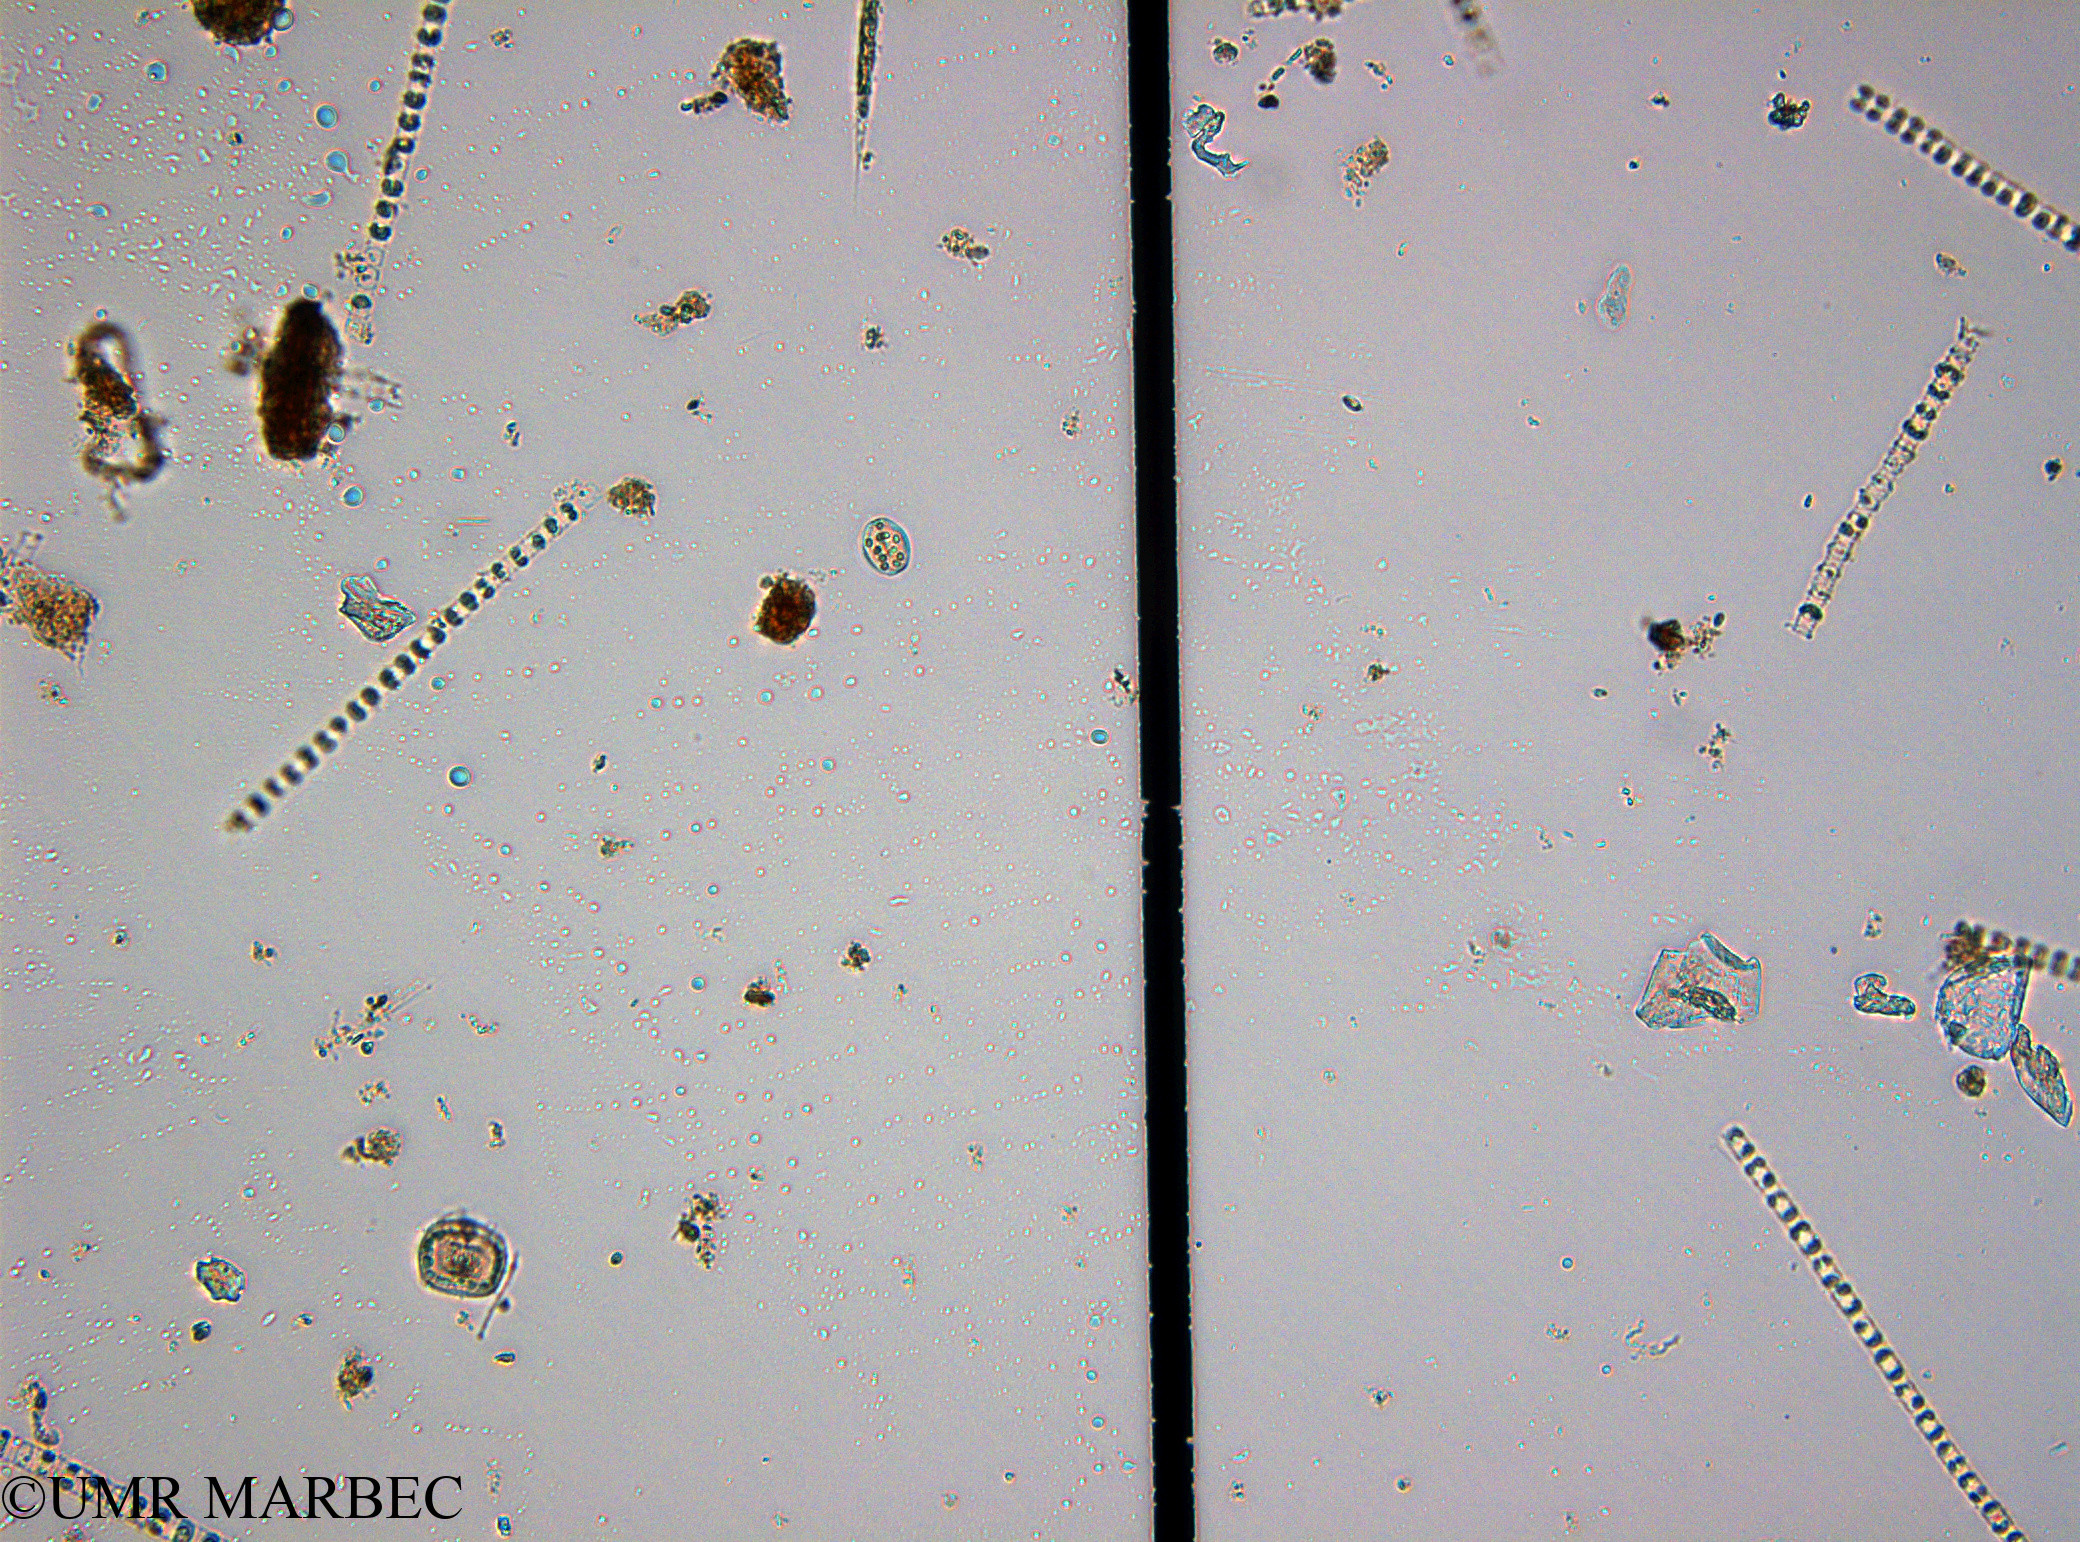 phyto/Guinea golf/Wouri_estuary_Chenal_2/YNkouefuthNfongmo_these 2022-2023/Centrique spp 5-10µm (old Centrique 9 small (Chenal2_SURF_2023_iden6230626_001).TIF(copy).jpg